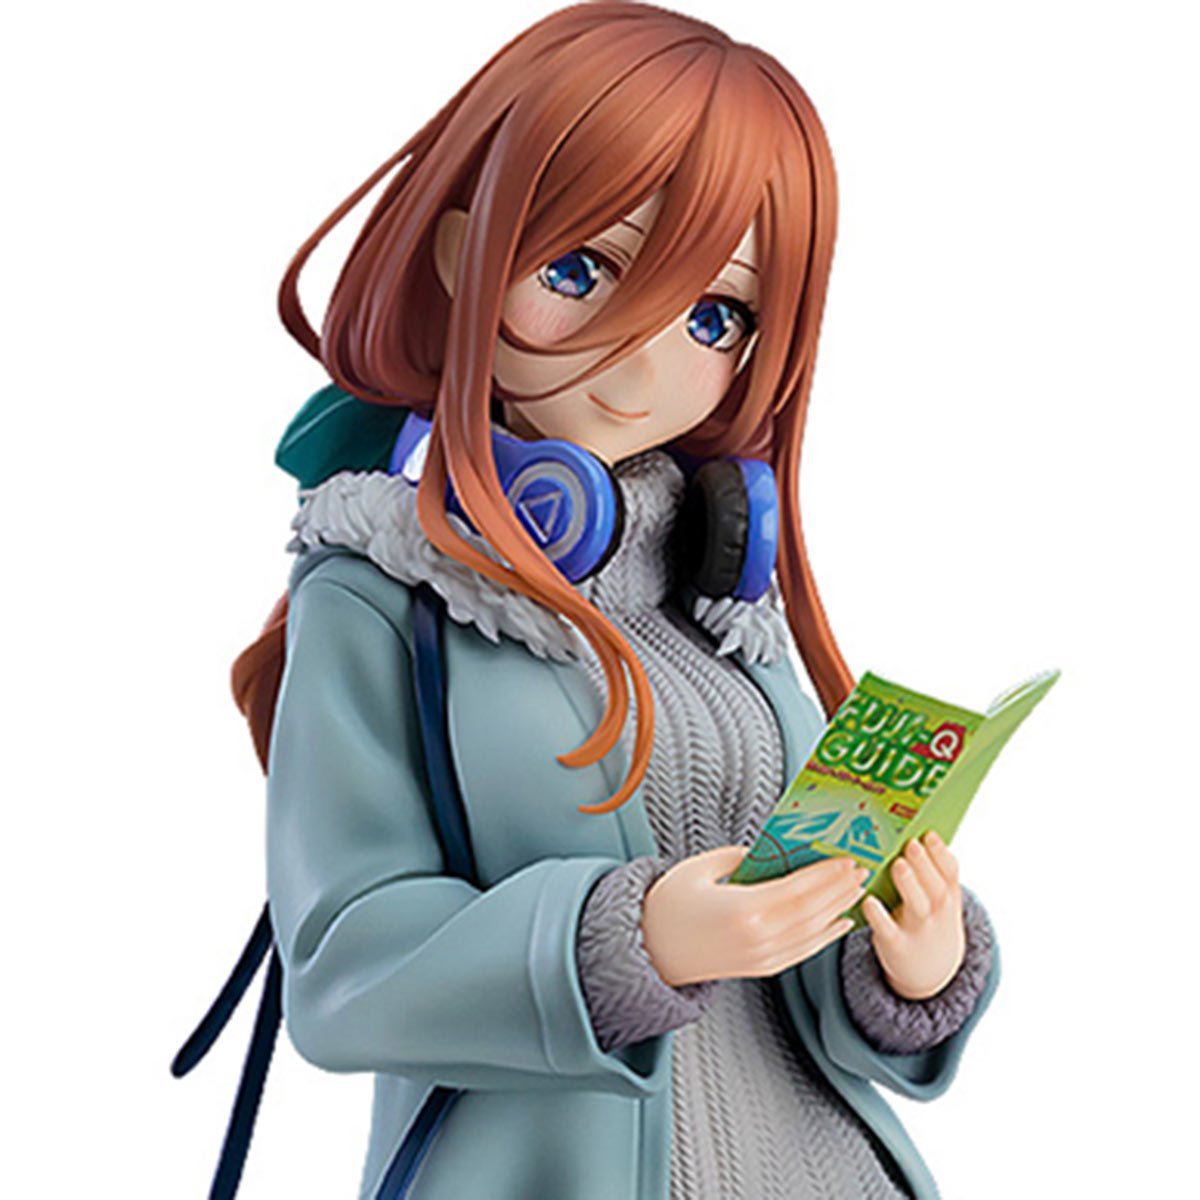 Find about Quintessential Quintuplets' the main plot and characters with  their birthday, age and height - Anime Superior